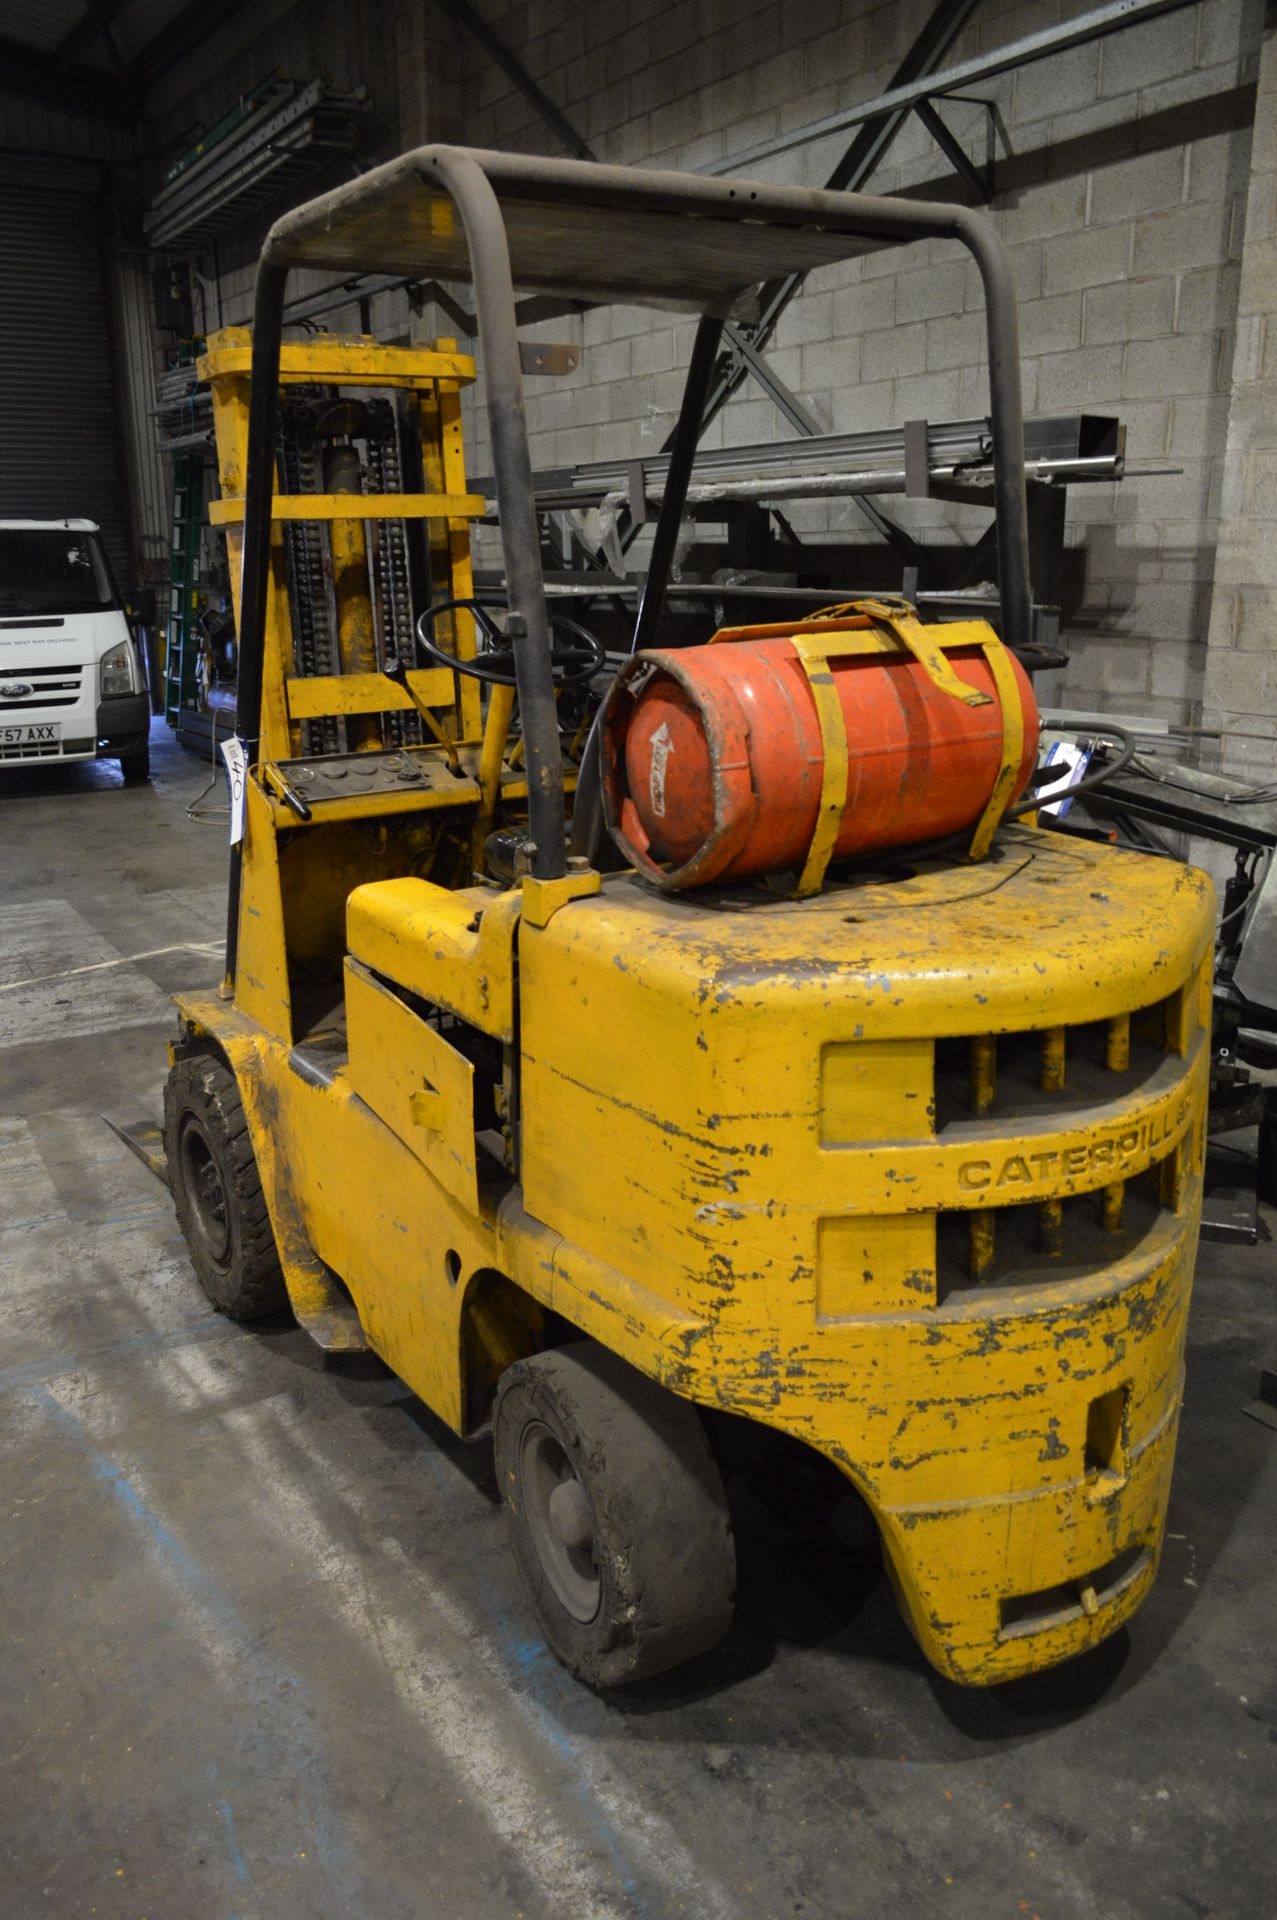 Caterpillar V50B TYPE G 2500kg cap GAS ENGINE FORK LIFT TRUCK, serial no. 54W328,., 3710mm max - Image 2 of 9